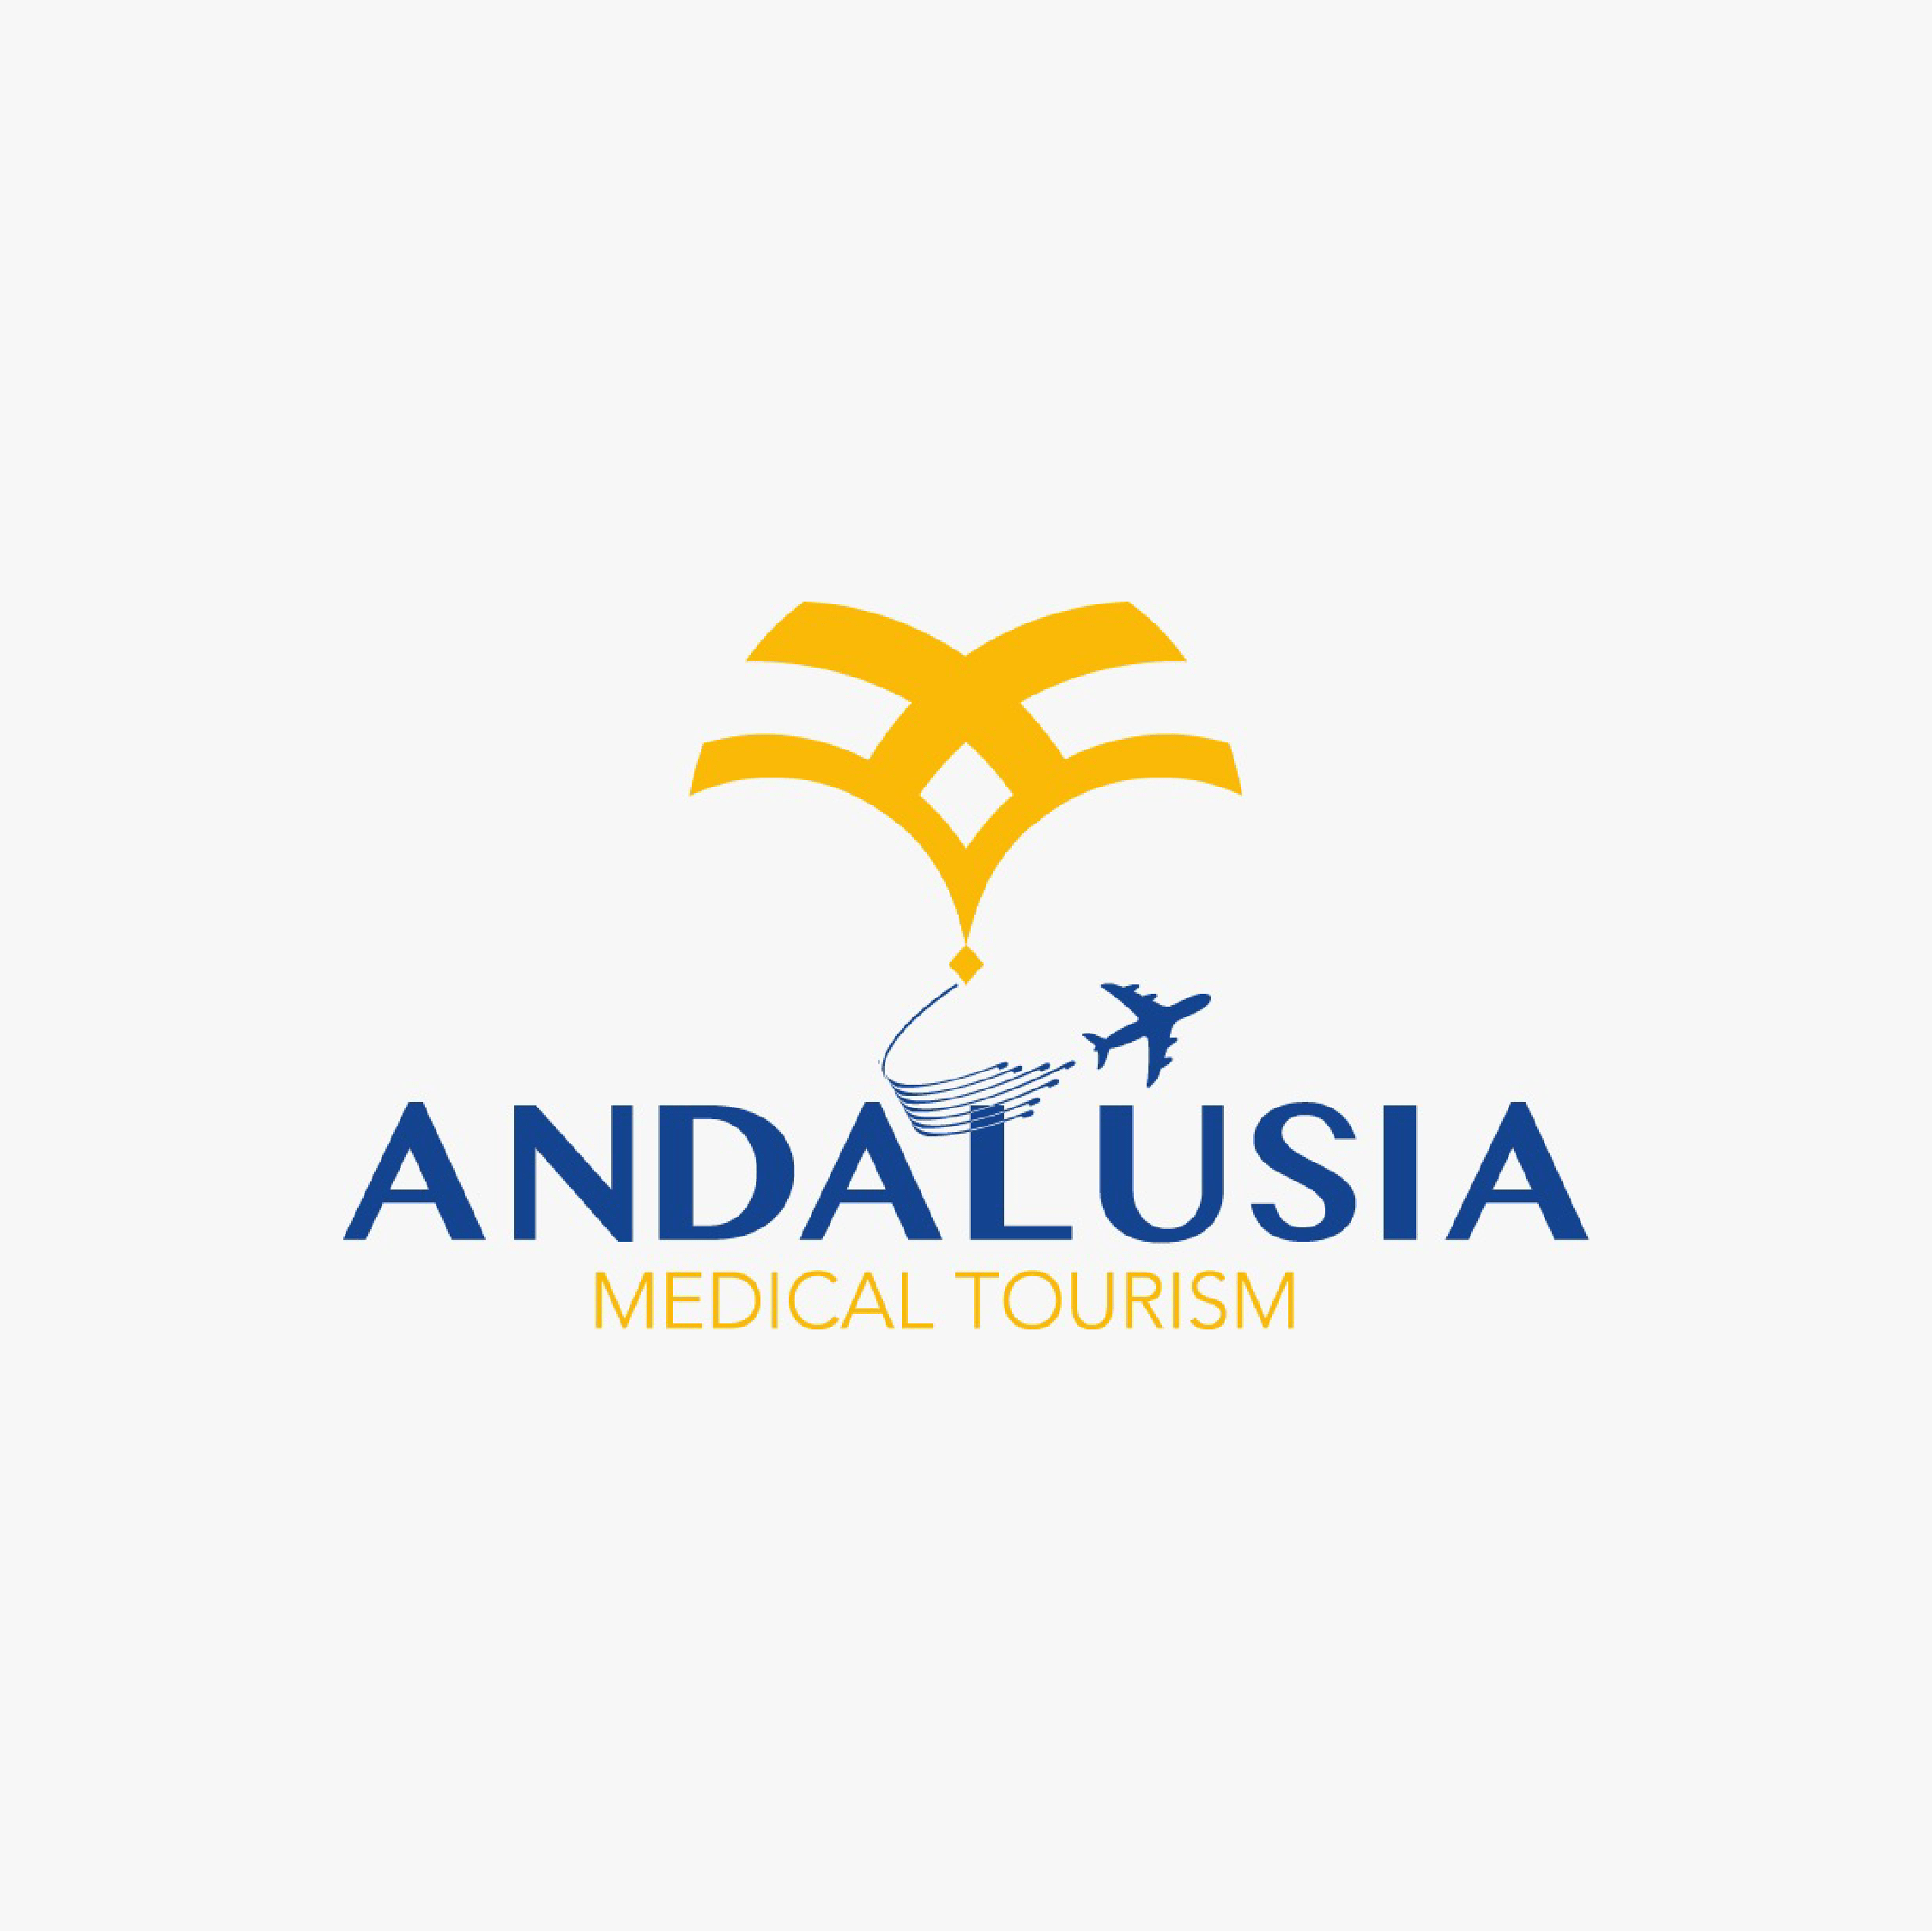 Andalusia Medical Tourism